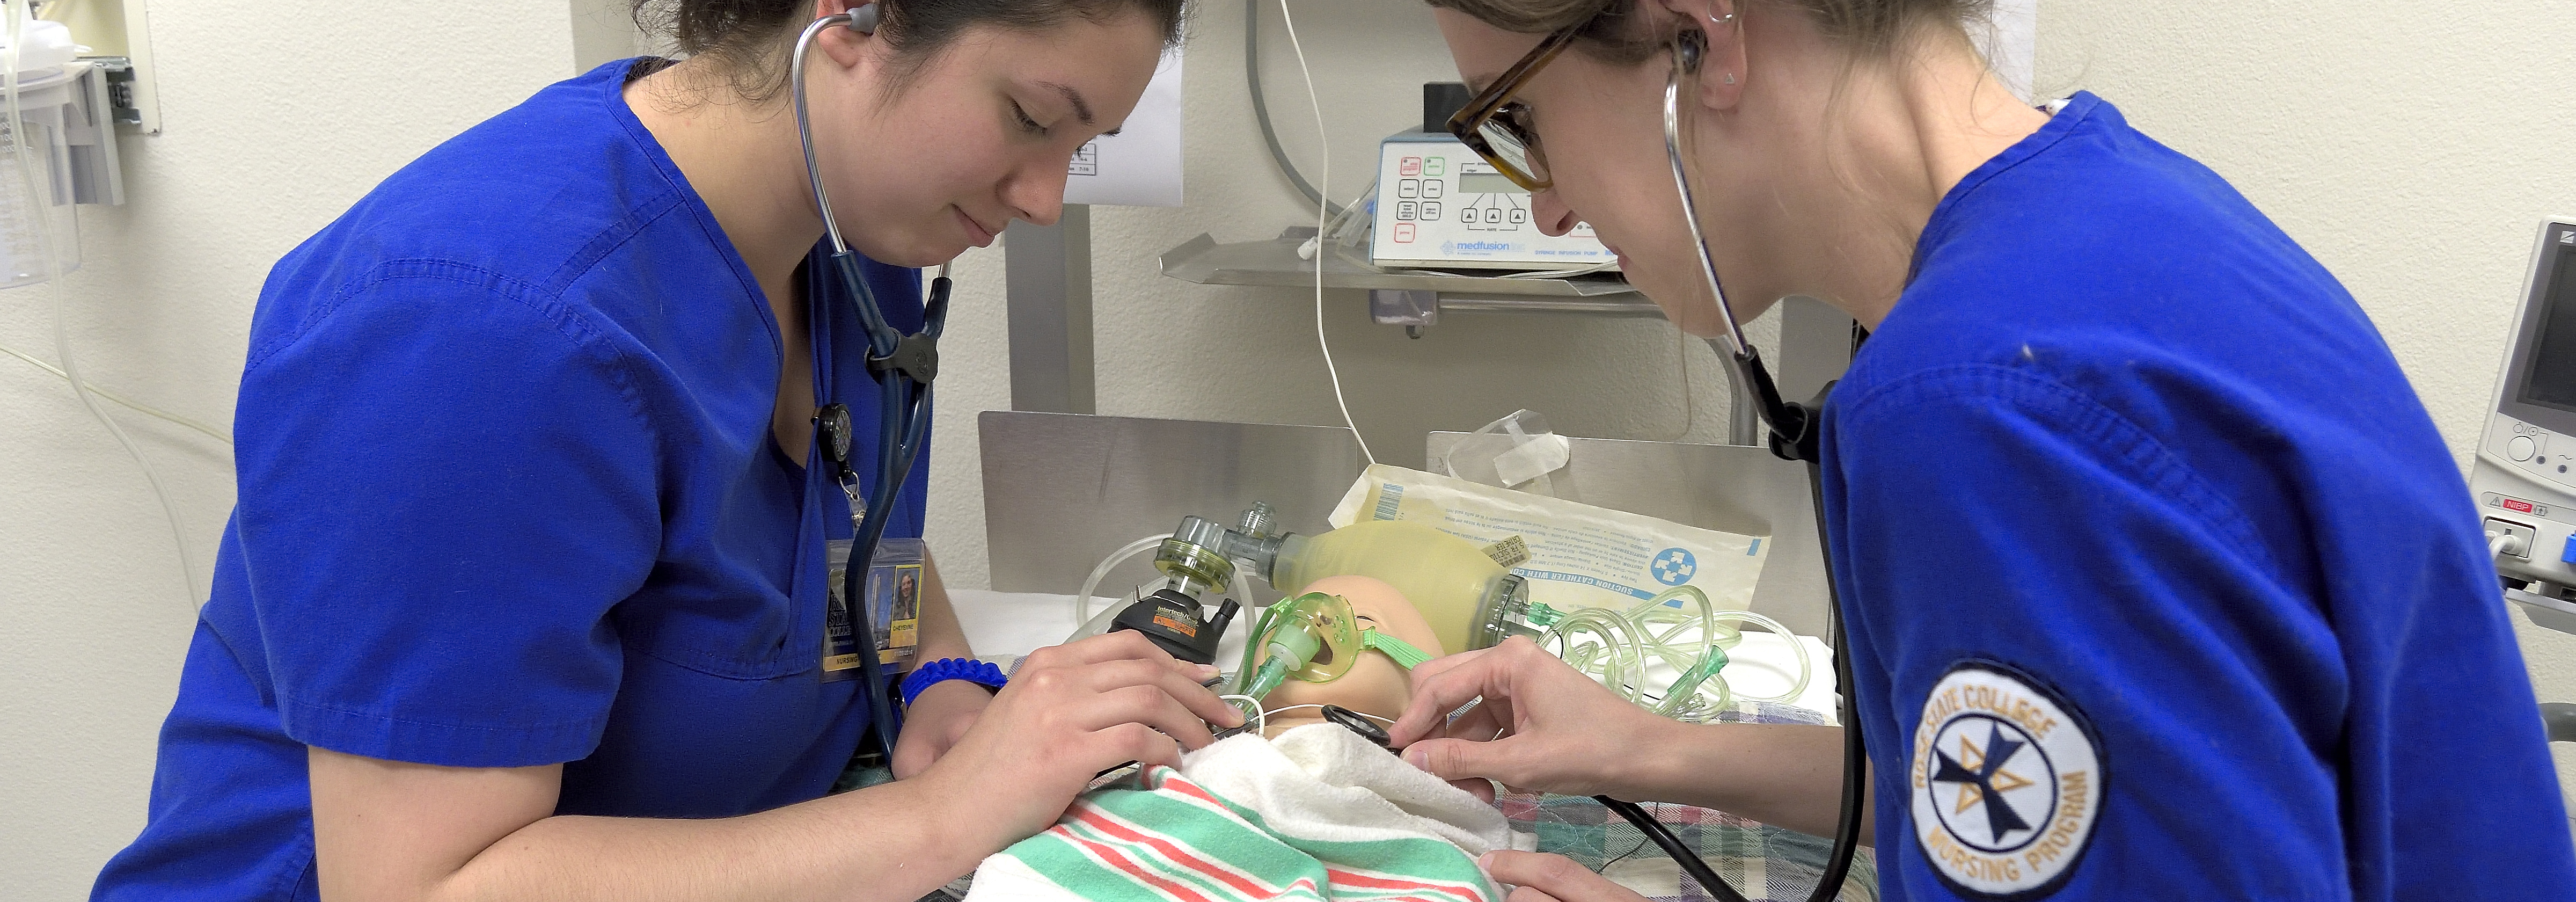 two nursing students working on a dummy